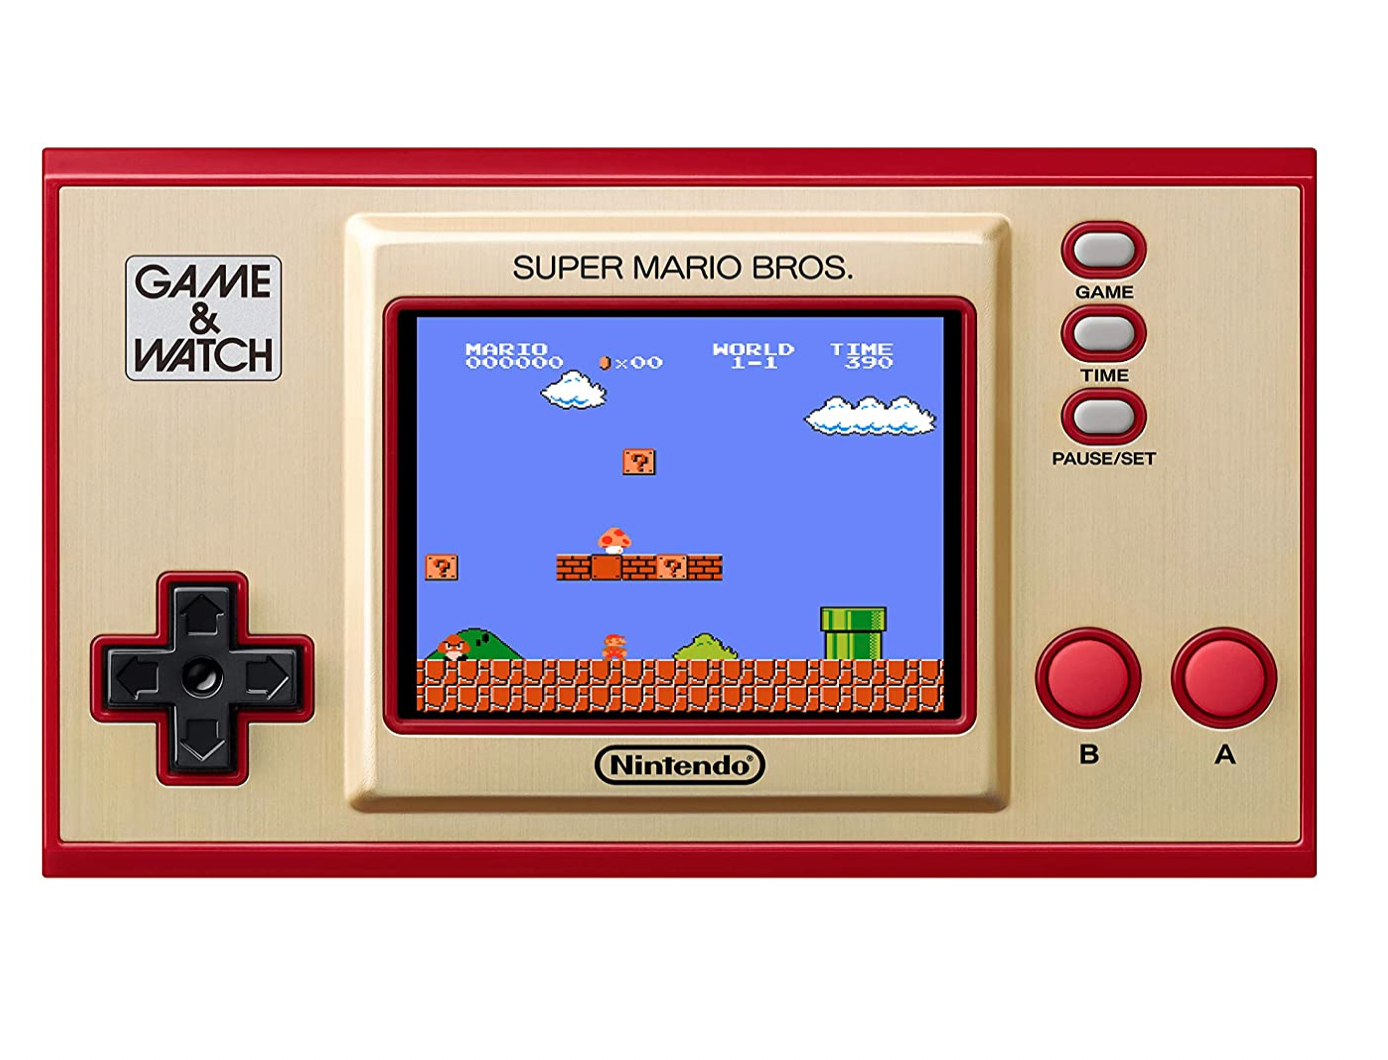 Play Super Mario Bros. – Game & Watch style!